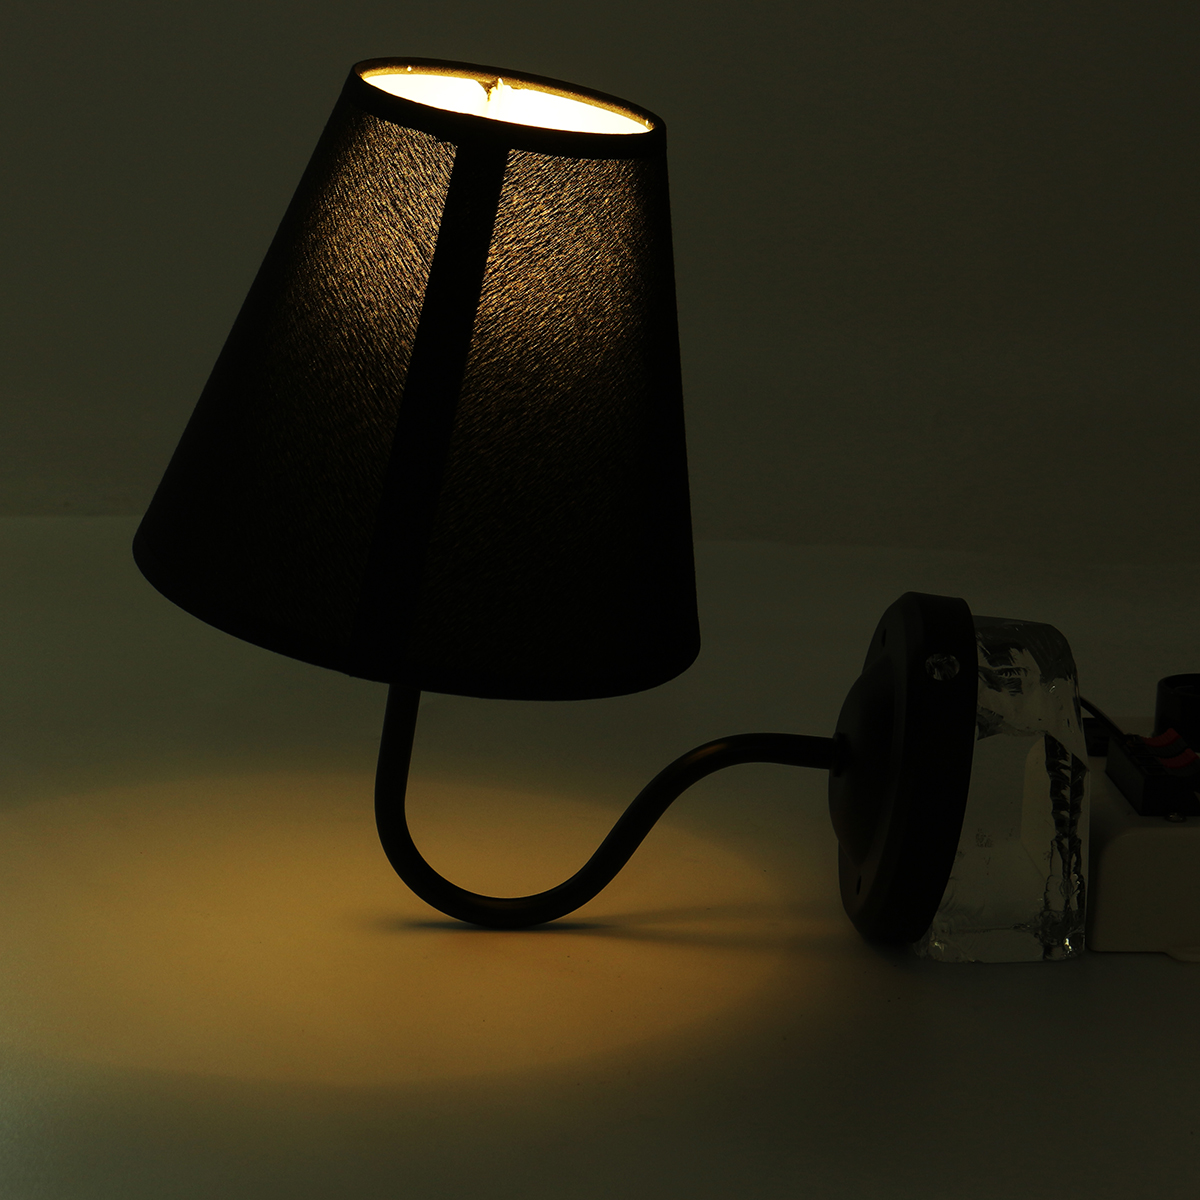 Vintage-Wall-Light-American-Style-Bedroom-Wrought-Iron-Retro-Bedside-Lamp-with-Power-Switch-Cord-Wit-1809575-14